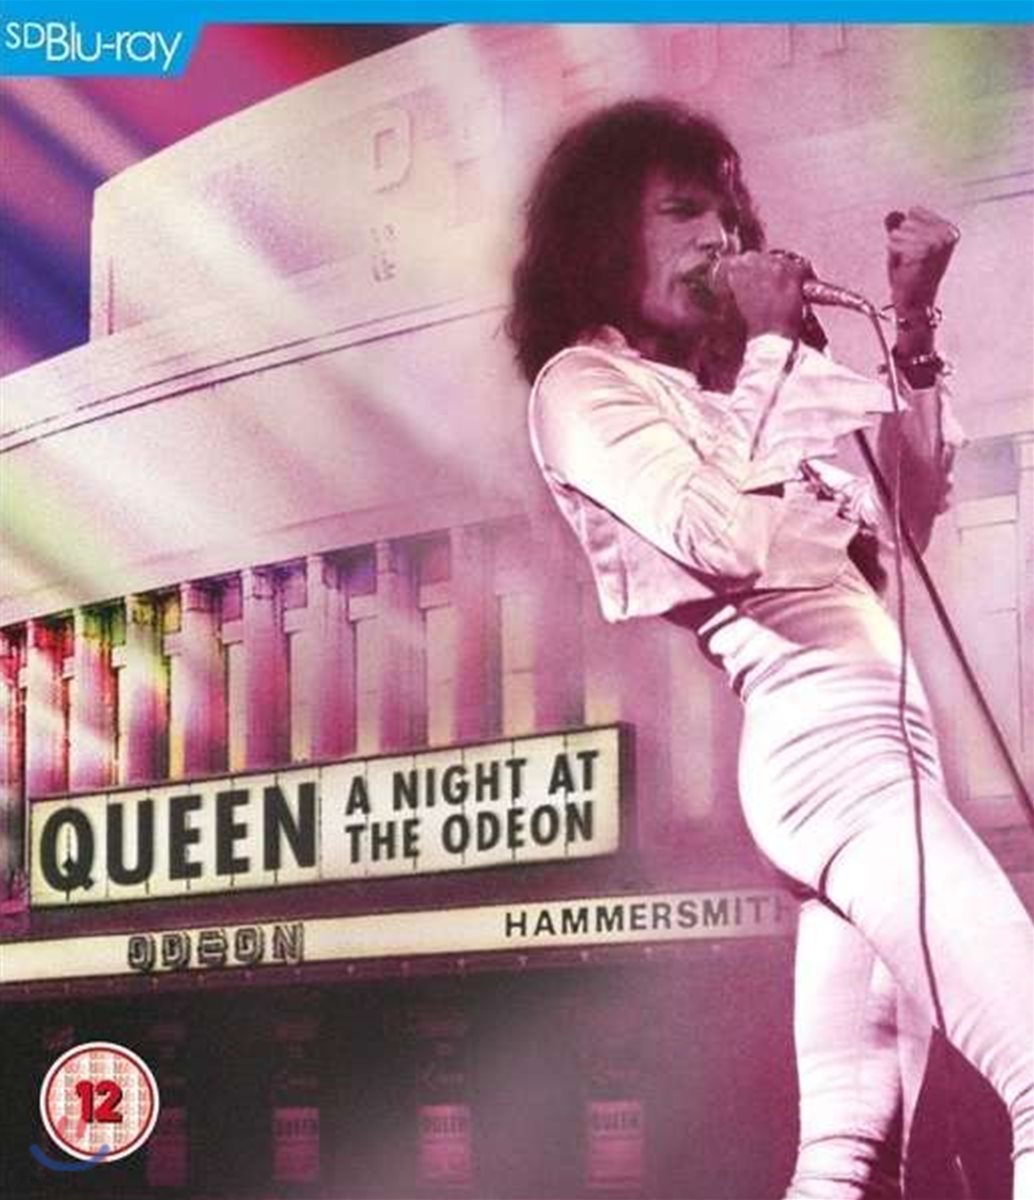 Queen - A Night At The Odeon Hammersmith 1975 해머스미스 공연 라이브 [블루레이]